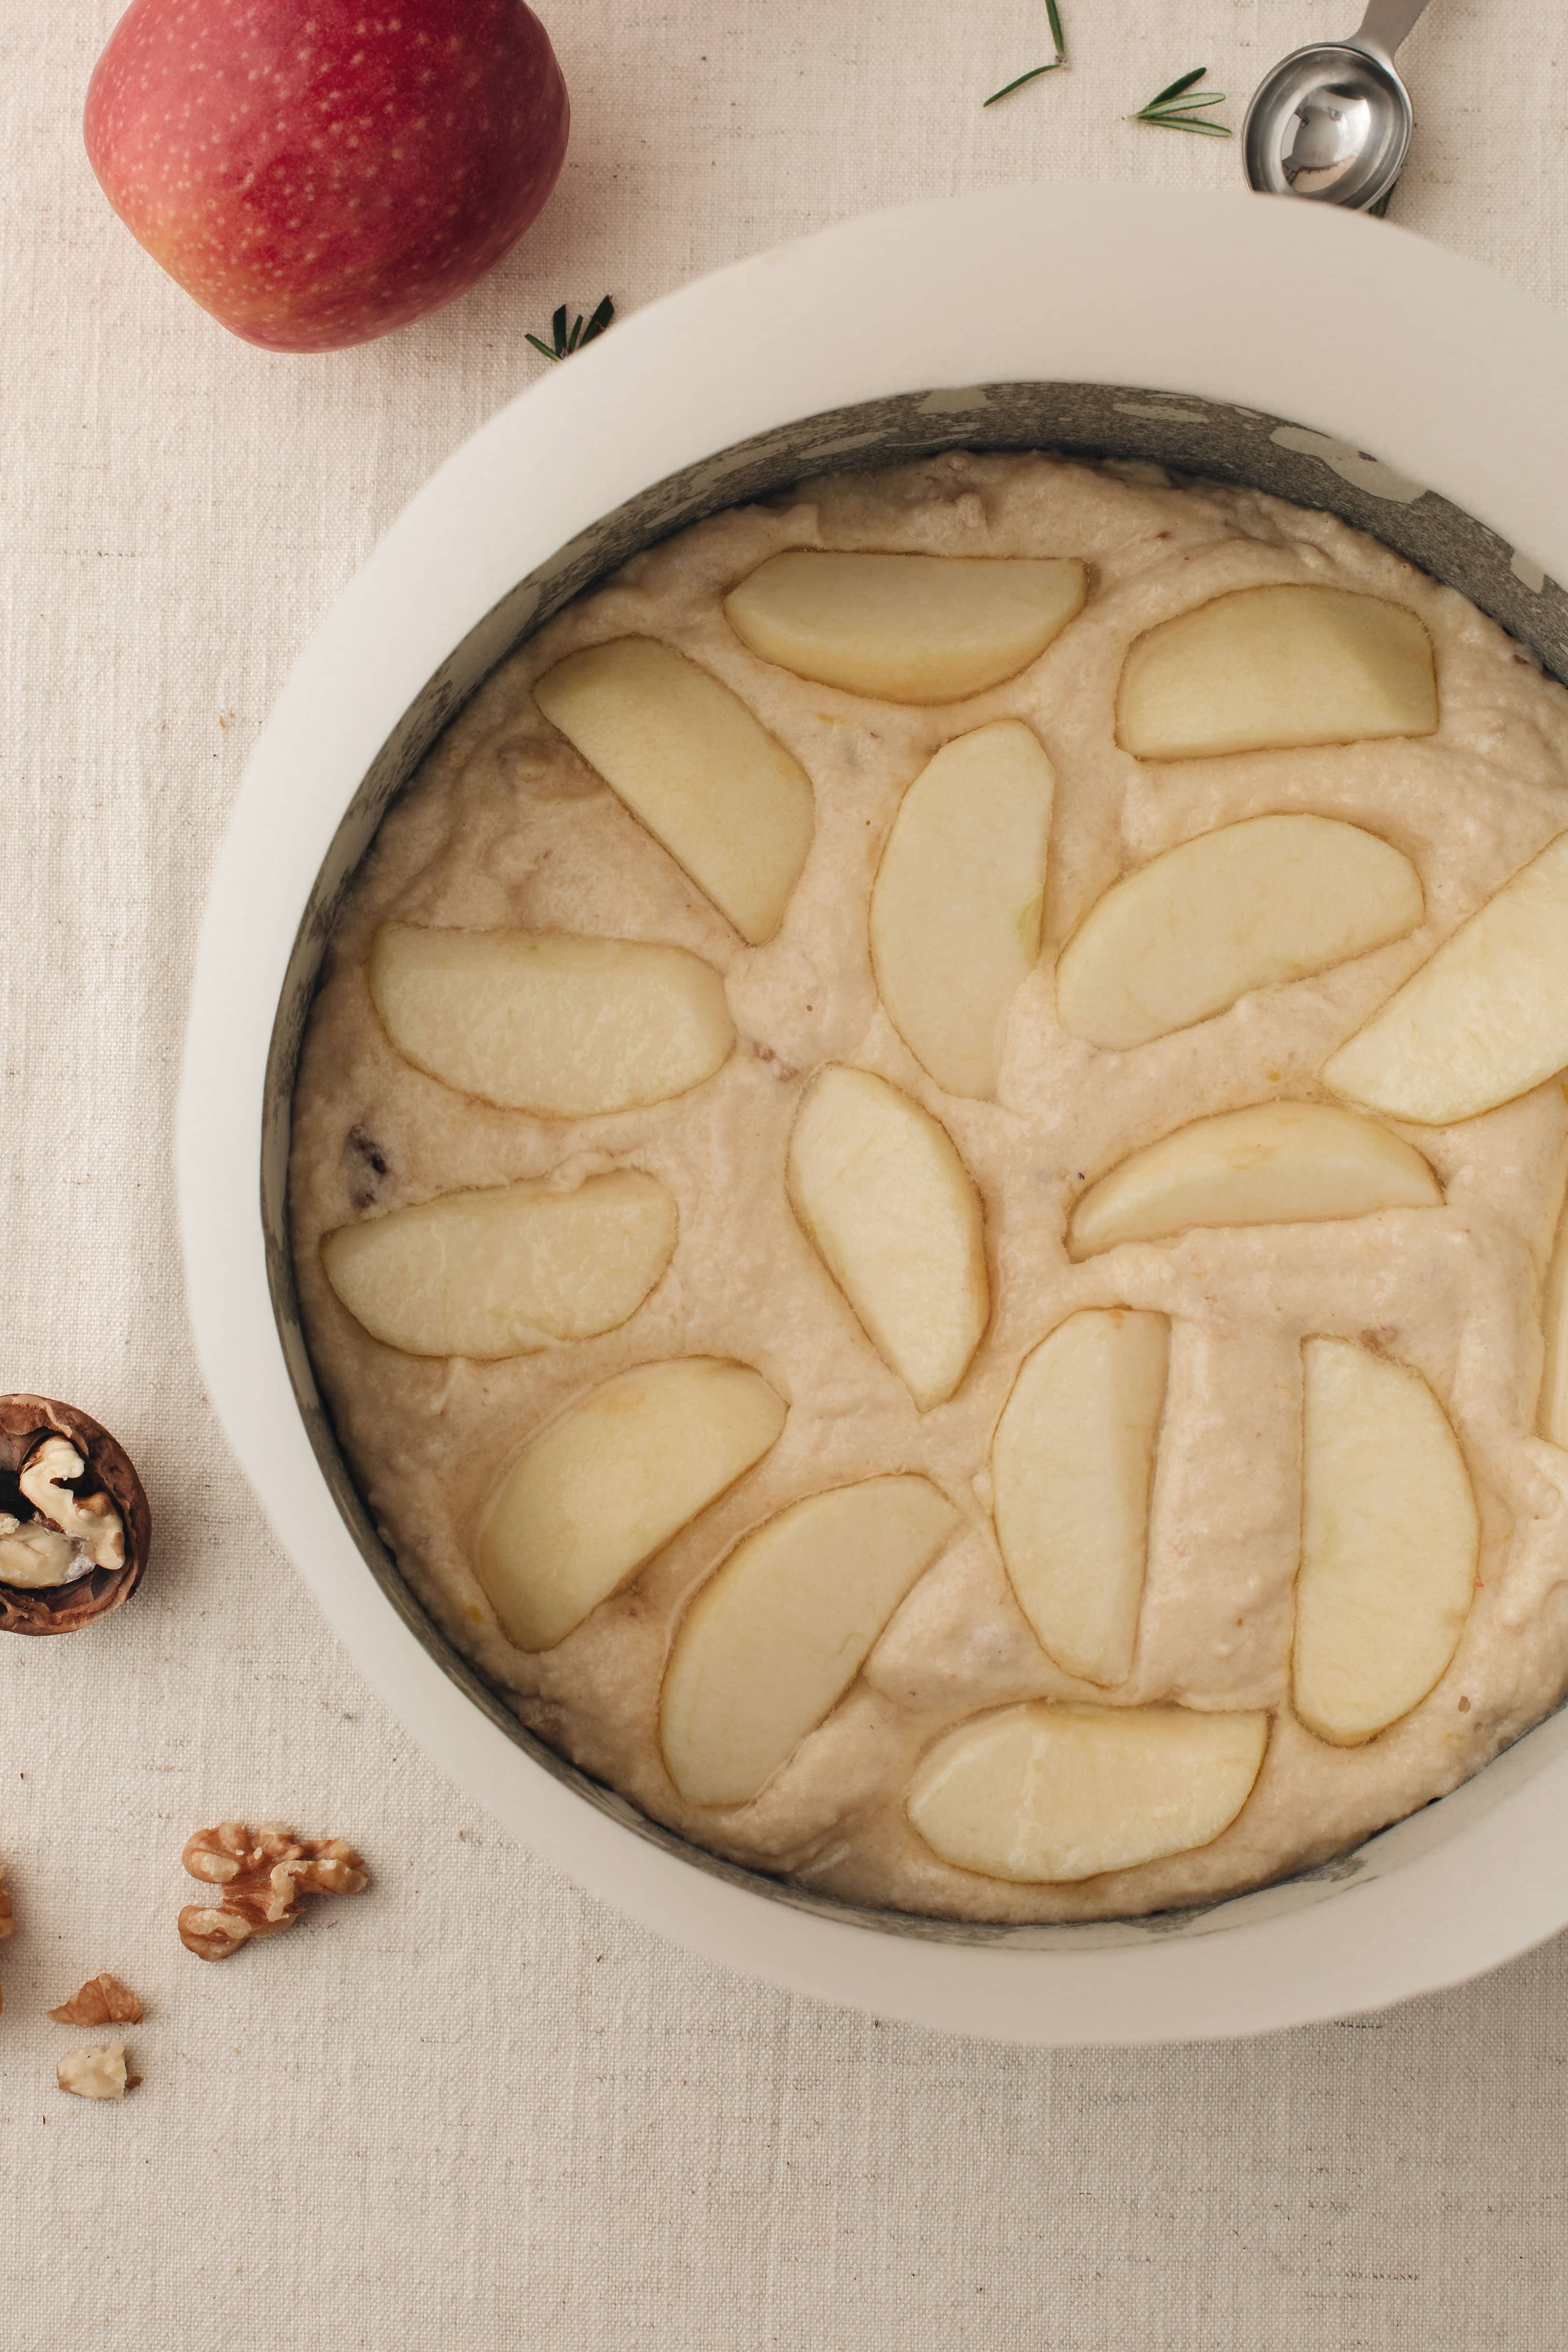 Apple, walnut and olive oil cake. The perfect Sunday afternoon tea, served and stored in Nesting Bowls by Styleware.